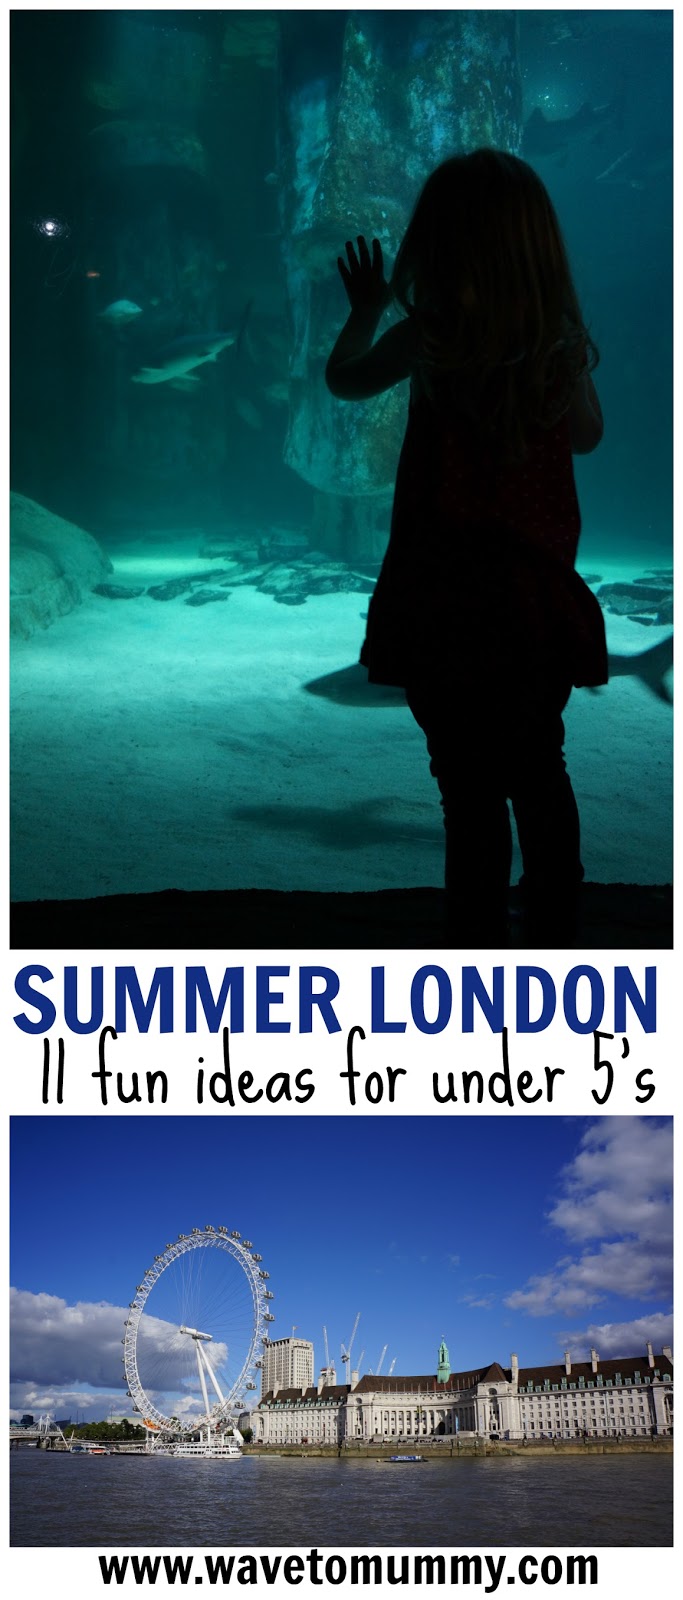 Top tips from a Londoner: 11 fun things to do in London with toddlers and pre-schoolers during the summer. Includes the best attractions for under 5's and several tips for free activities in London too! Recommendations such as London Aquarium, Zoo, museums, shop events and best parks!